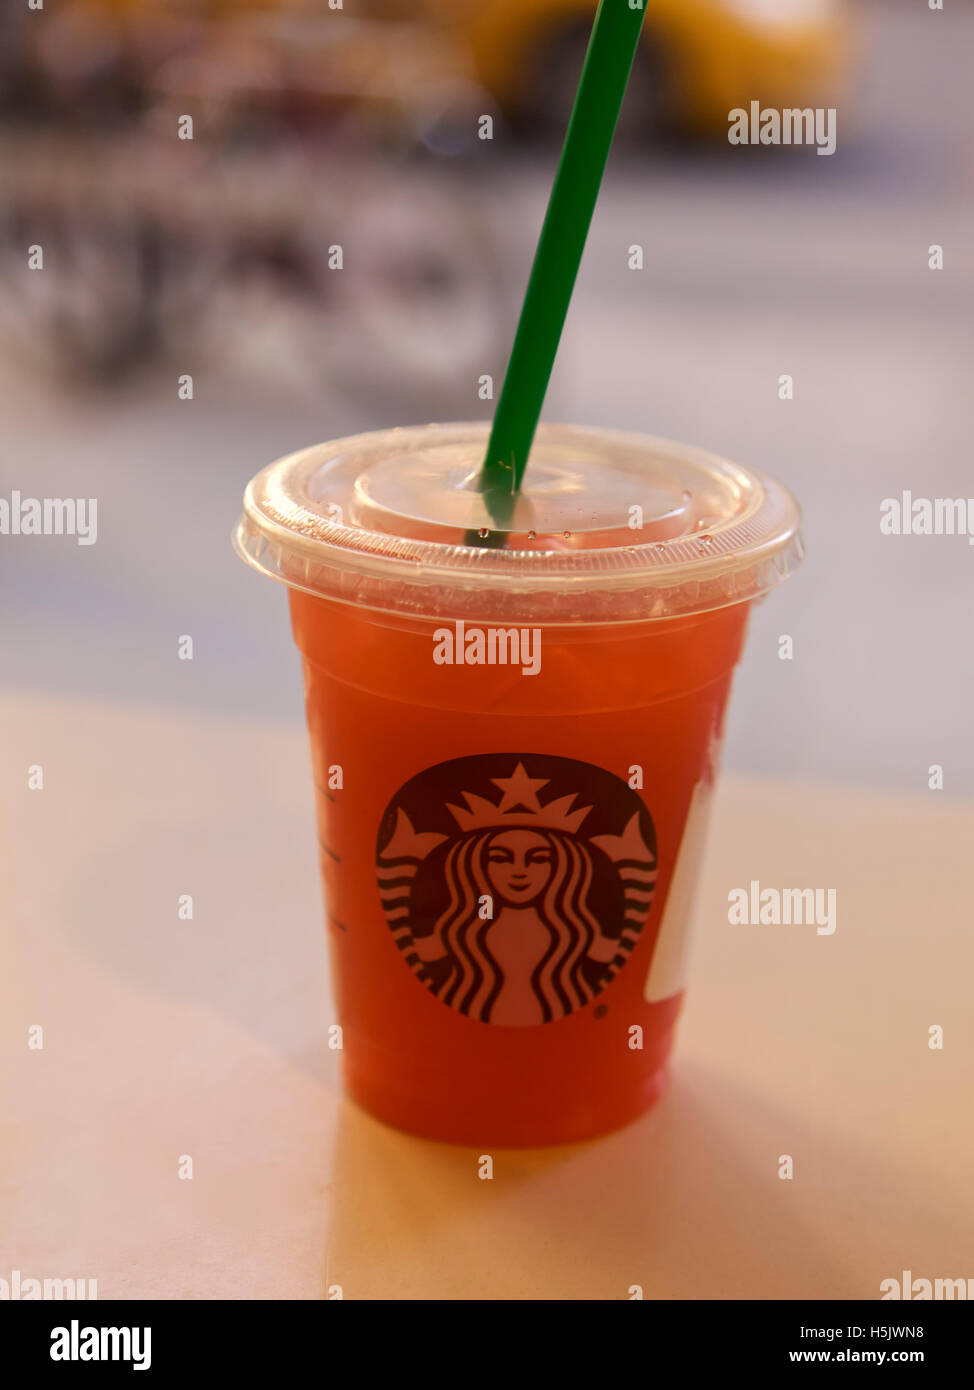 Starbucks fruit drink inside a store on April 16 2016 in New York, USA Stock Photo